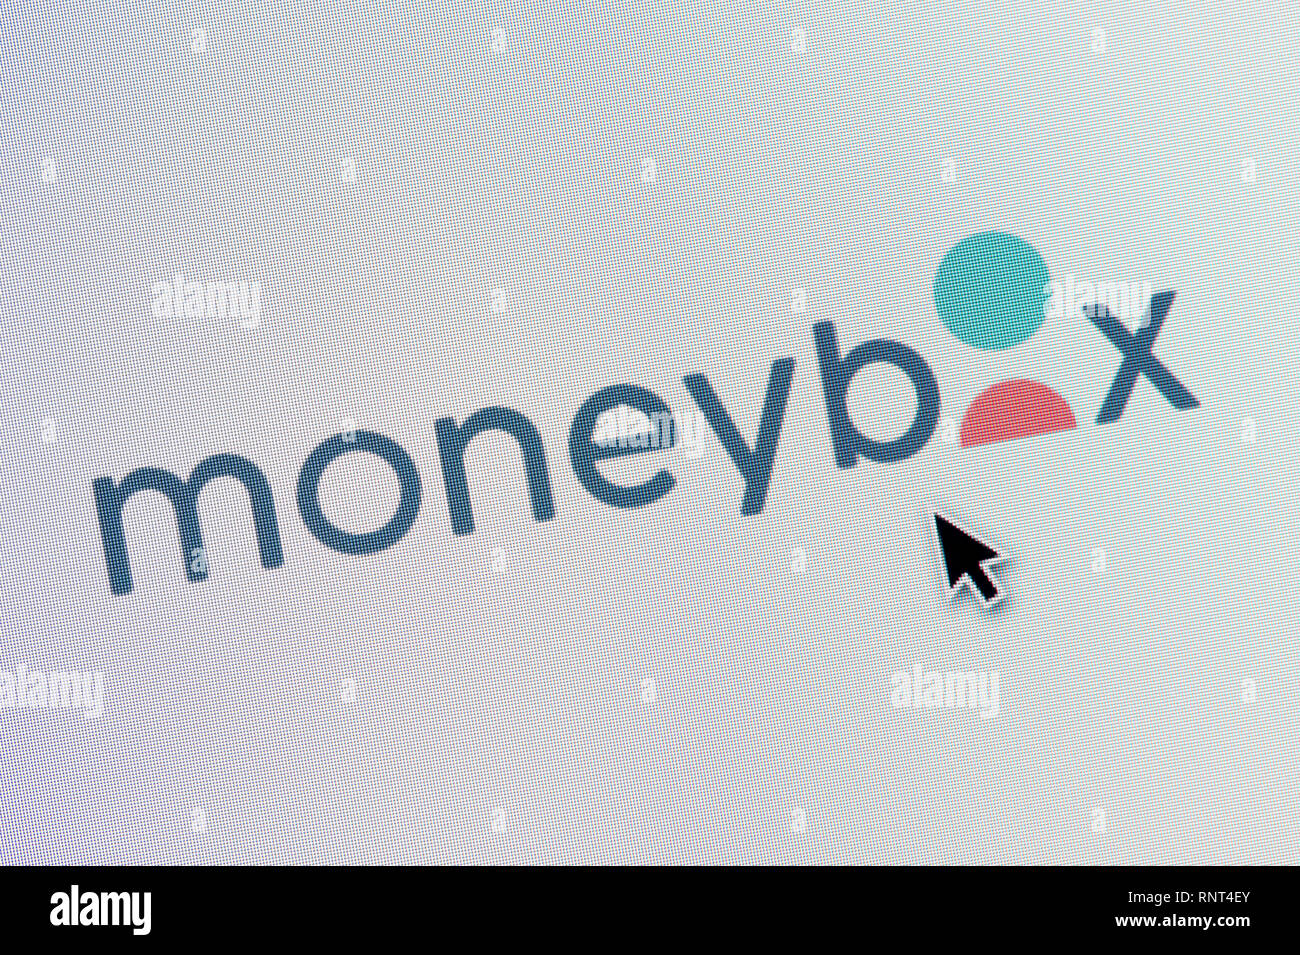 The logo of Moneybox is seen on a computer screen along with a mouse cursor (Editorial use only) Stock Photo